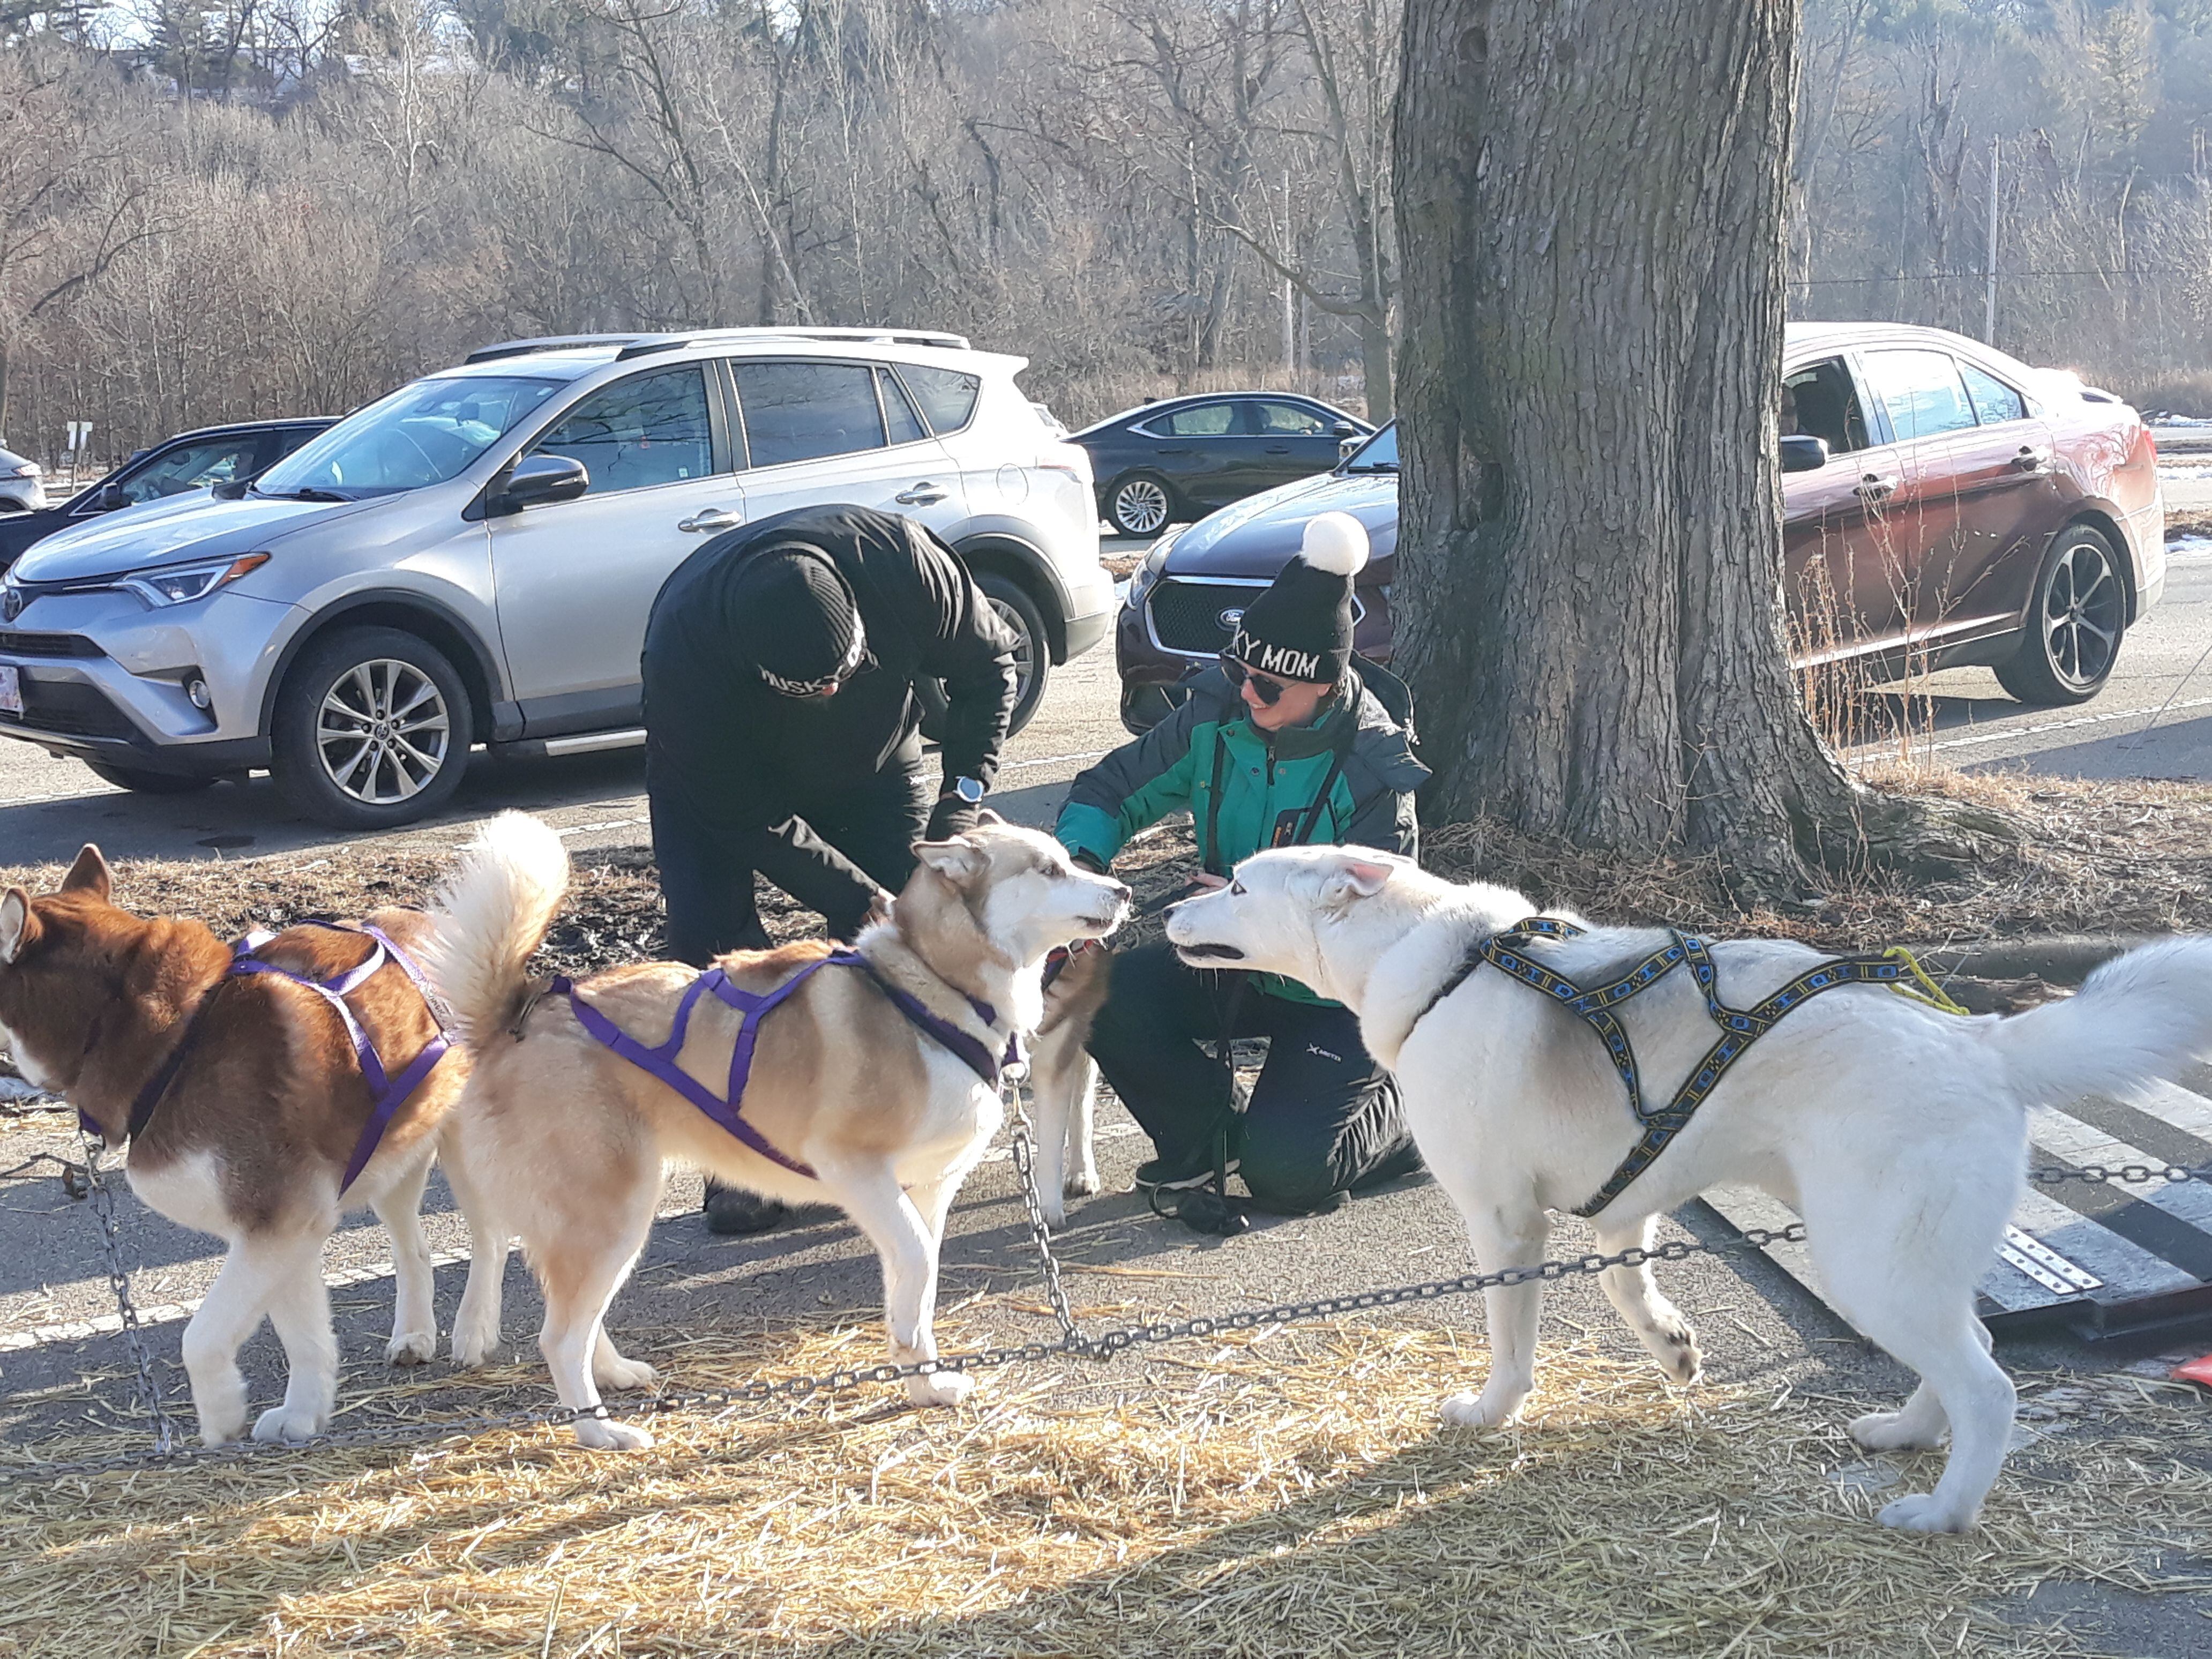 A team of huskies is getting prepared to perform a sled dog demonstration Sunday, Feb. 5, 2023, at the Starved Rock State Park Visitor Center parking lot.